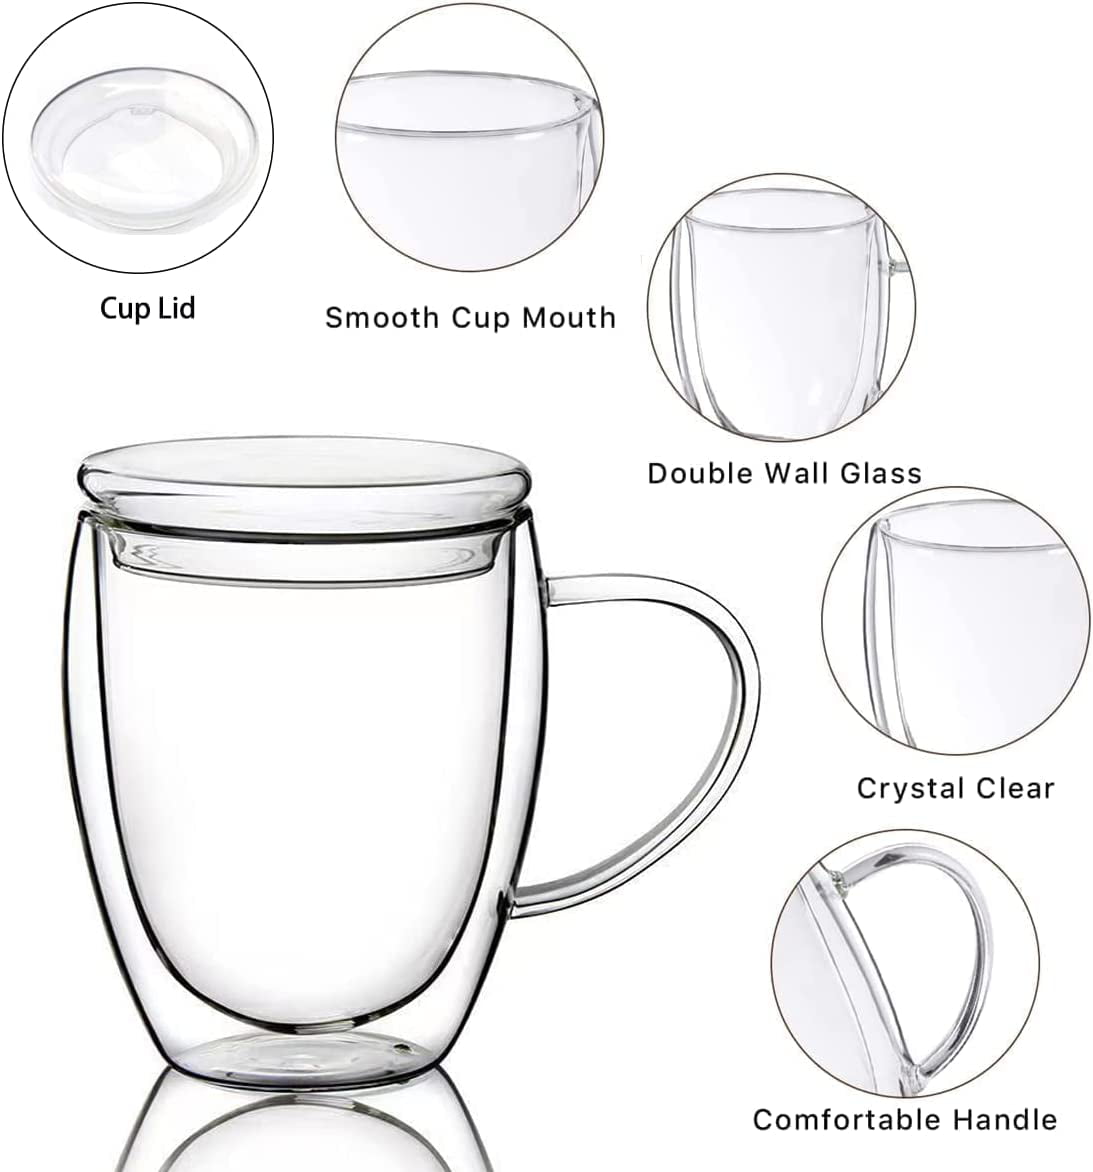 YUNCANG Double Wall Coffee Mugs, (4-Pcak) 16 Ounces-Clear  Glass with Handle,lnsulated,Cappuccino,Tea,LatteCups,Beverage Glasses Heat  Resistant: Coffee Cups & Mugs